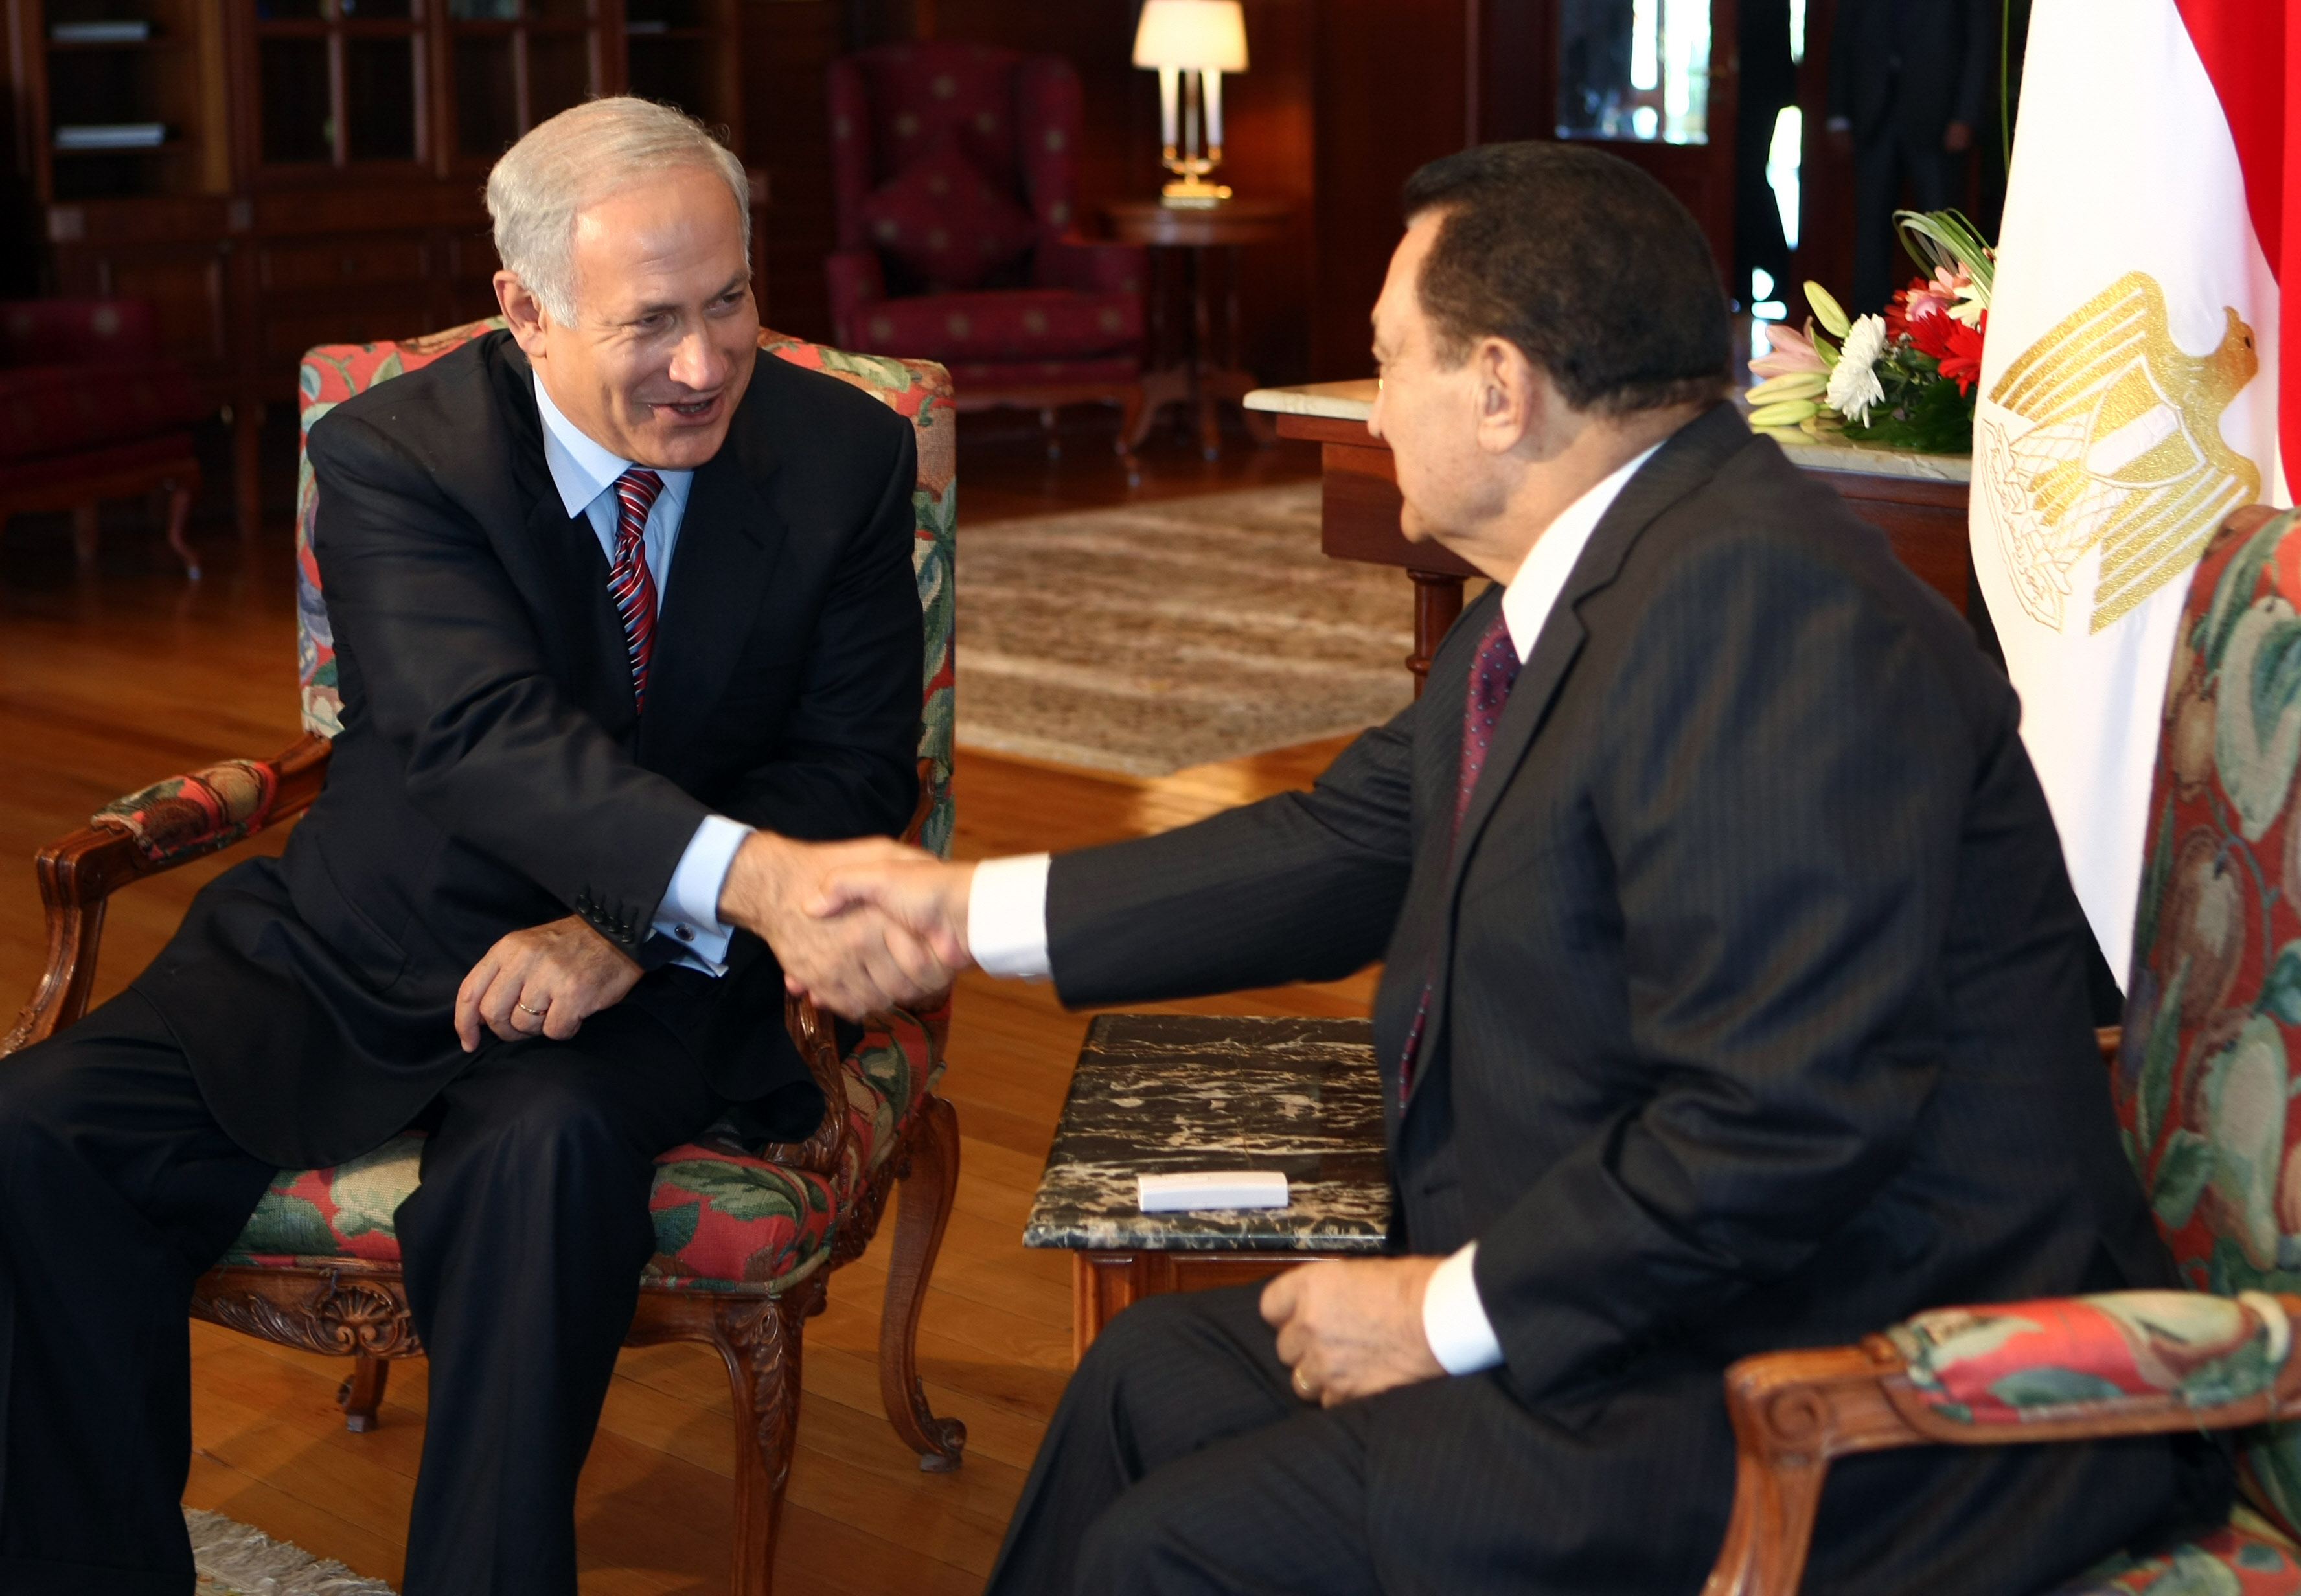 Egyptian President Hosni Mubarak (R) shakes hands with Israeli Prime Minister Benjamin Netanyahu (L) during a meeting in the Egyptian Red Sea resort town of Sharm El-Sheikh on May 11, 2009. 